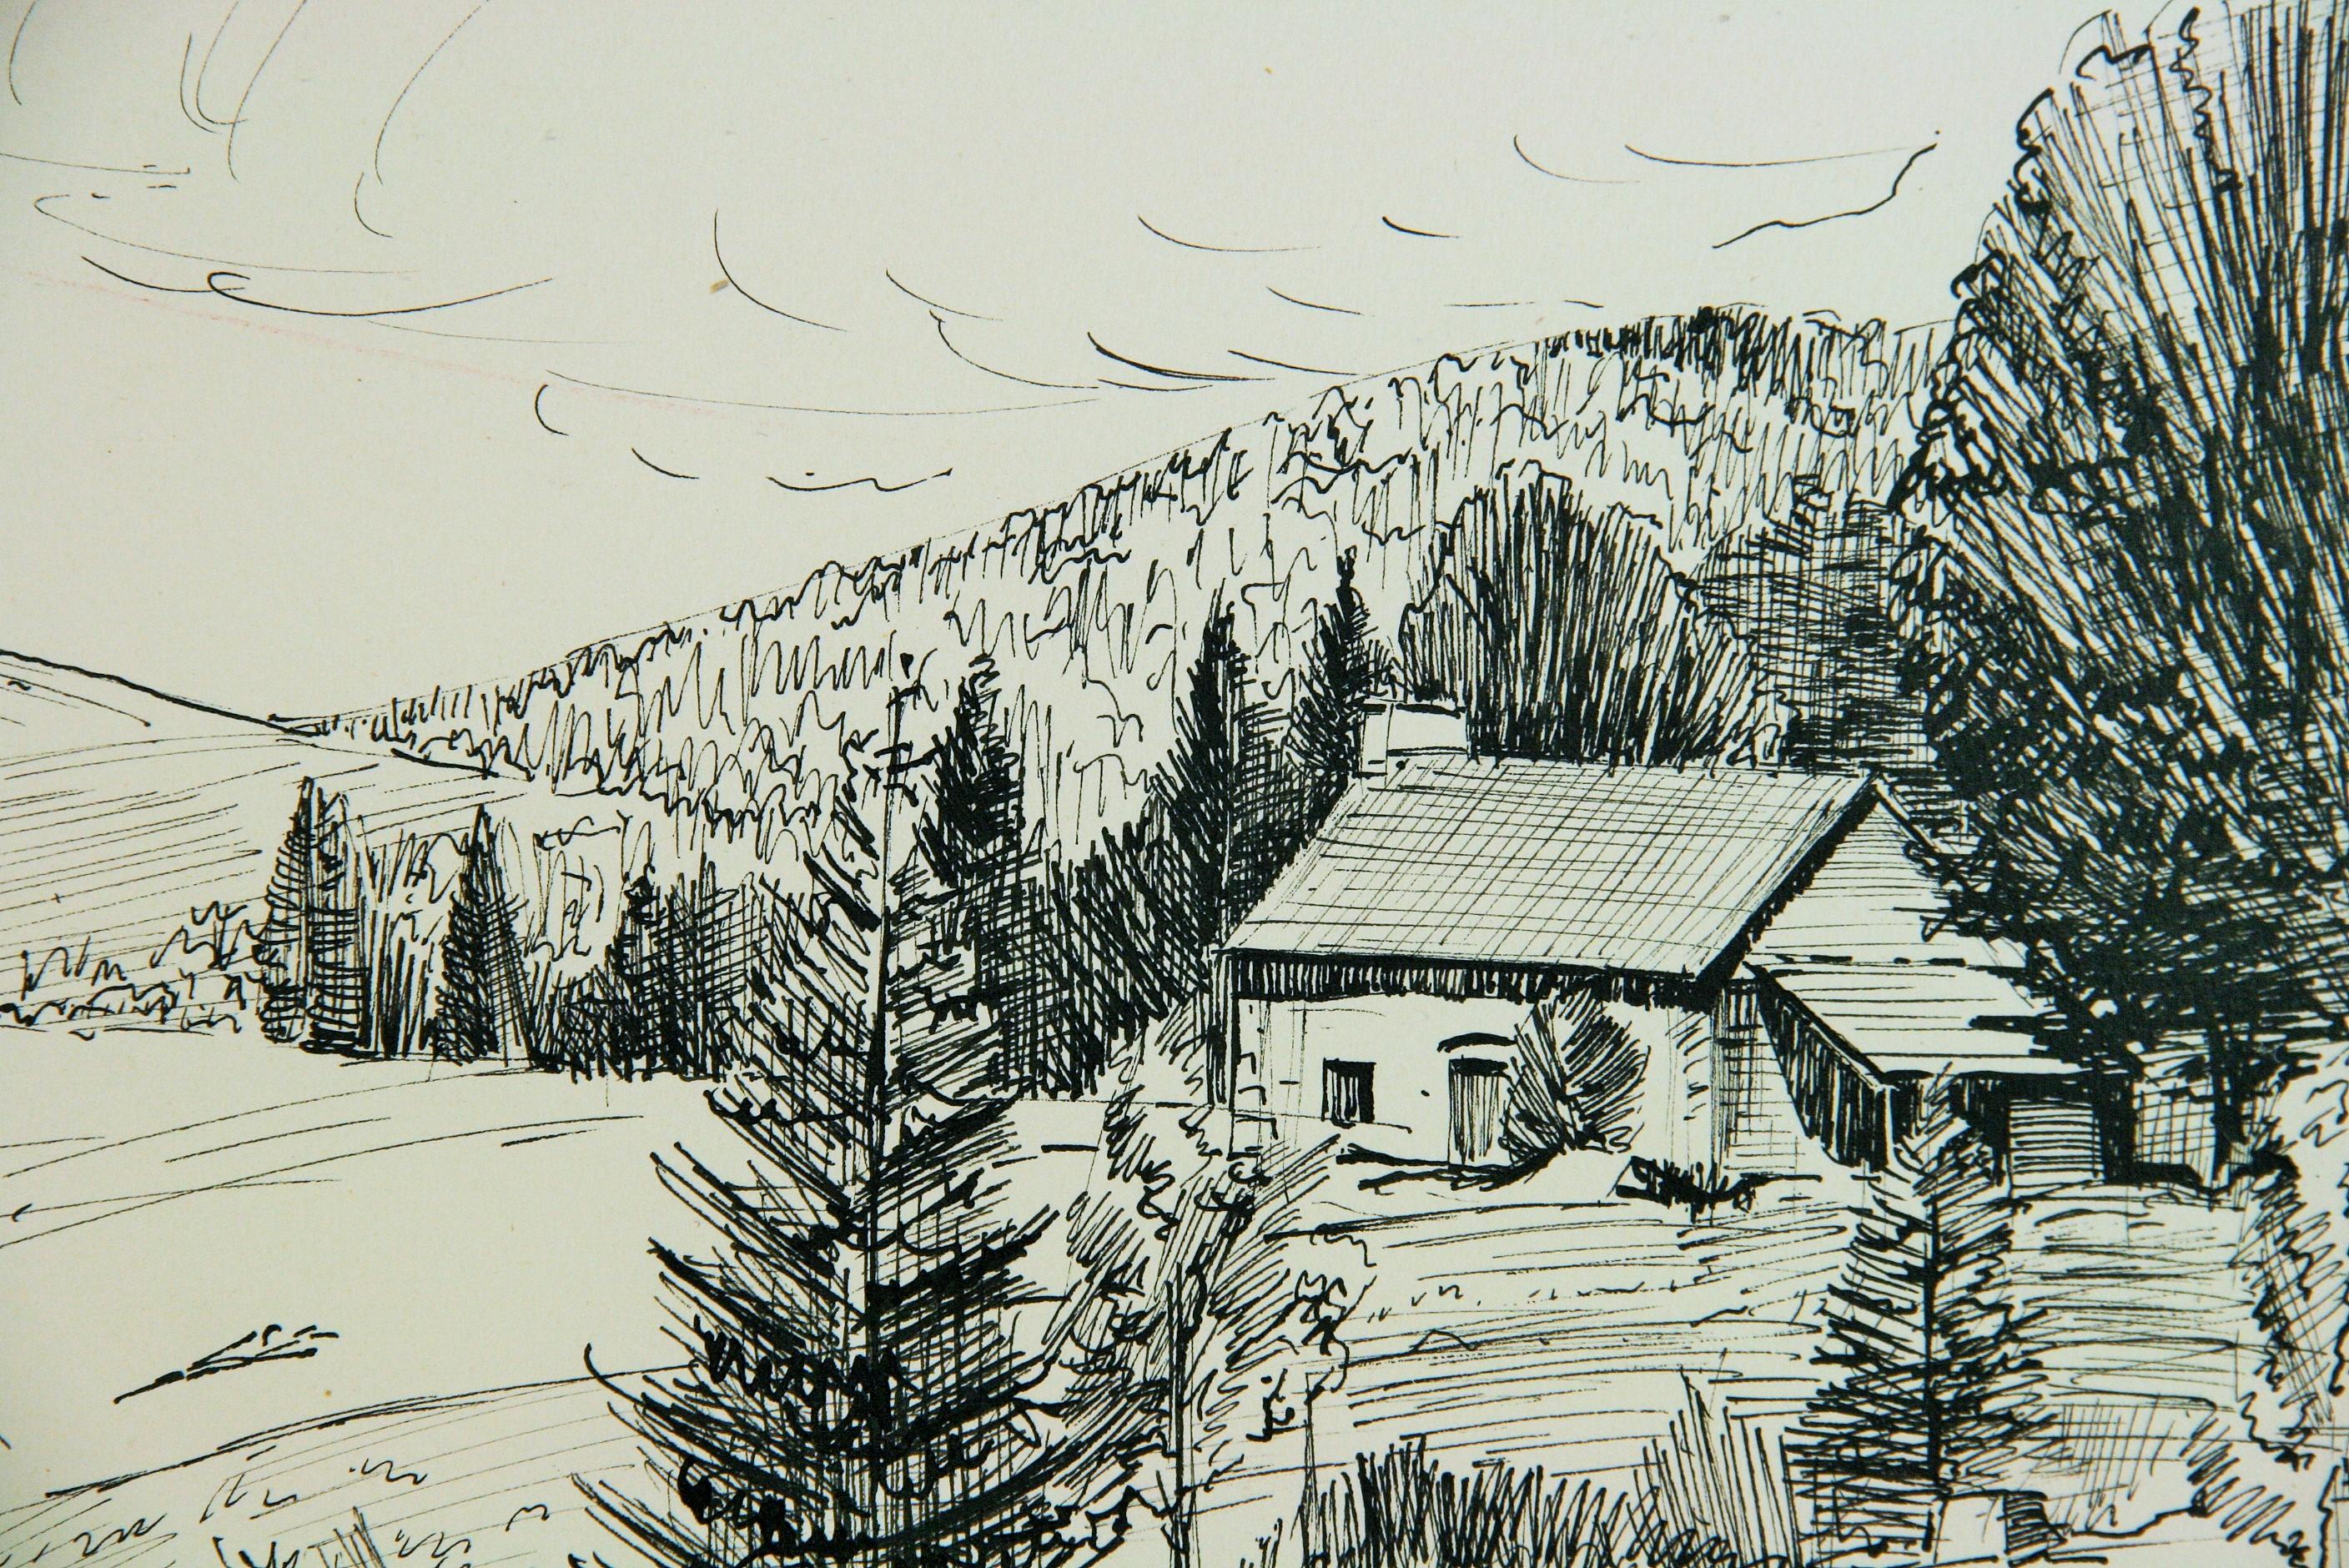 Maurice Falliès Landscape Art - French Countryside Landscape Pen and Ink